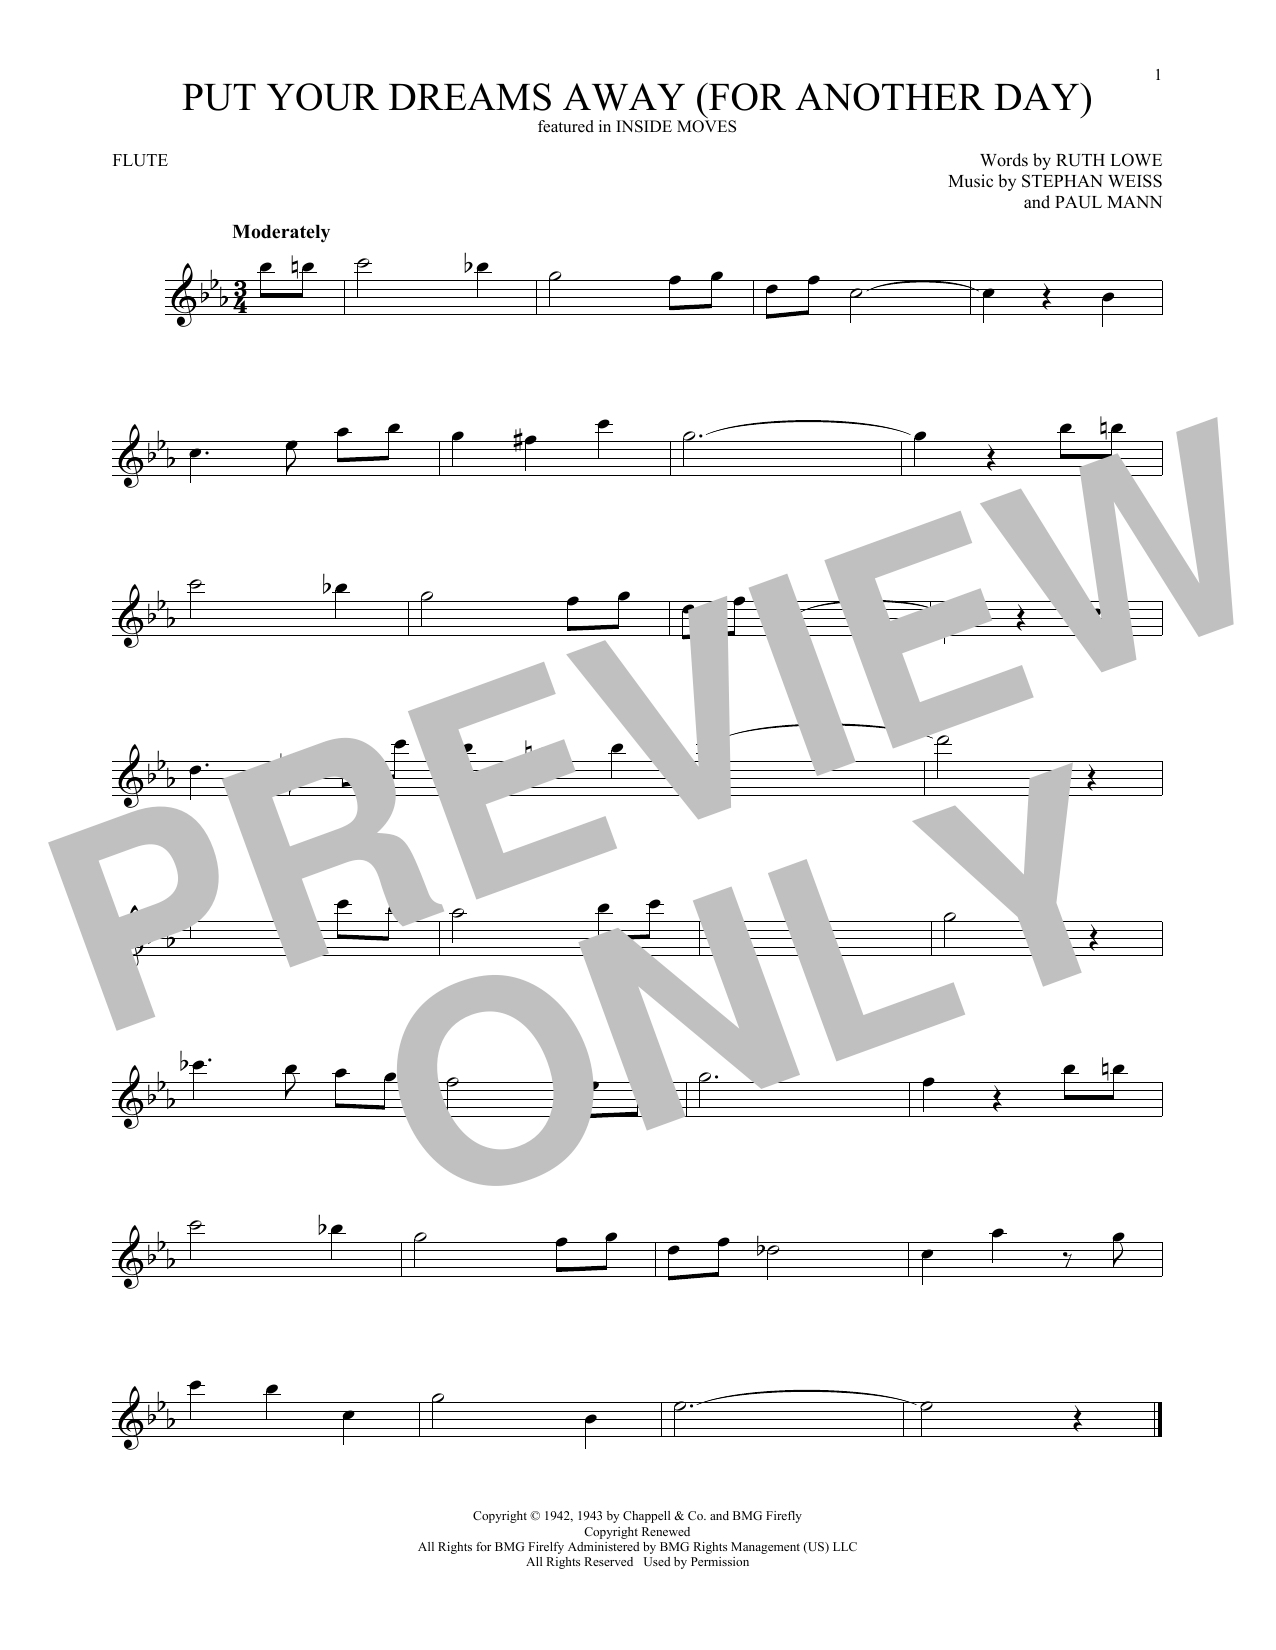 Download Frank Sinatra Put Your Dreams Away (For Another Day) Sheet Music